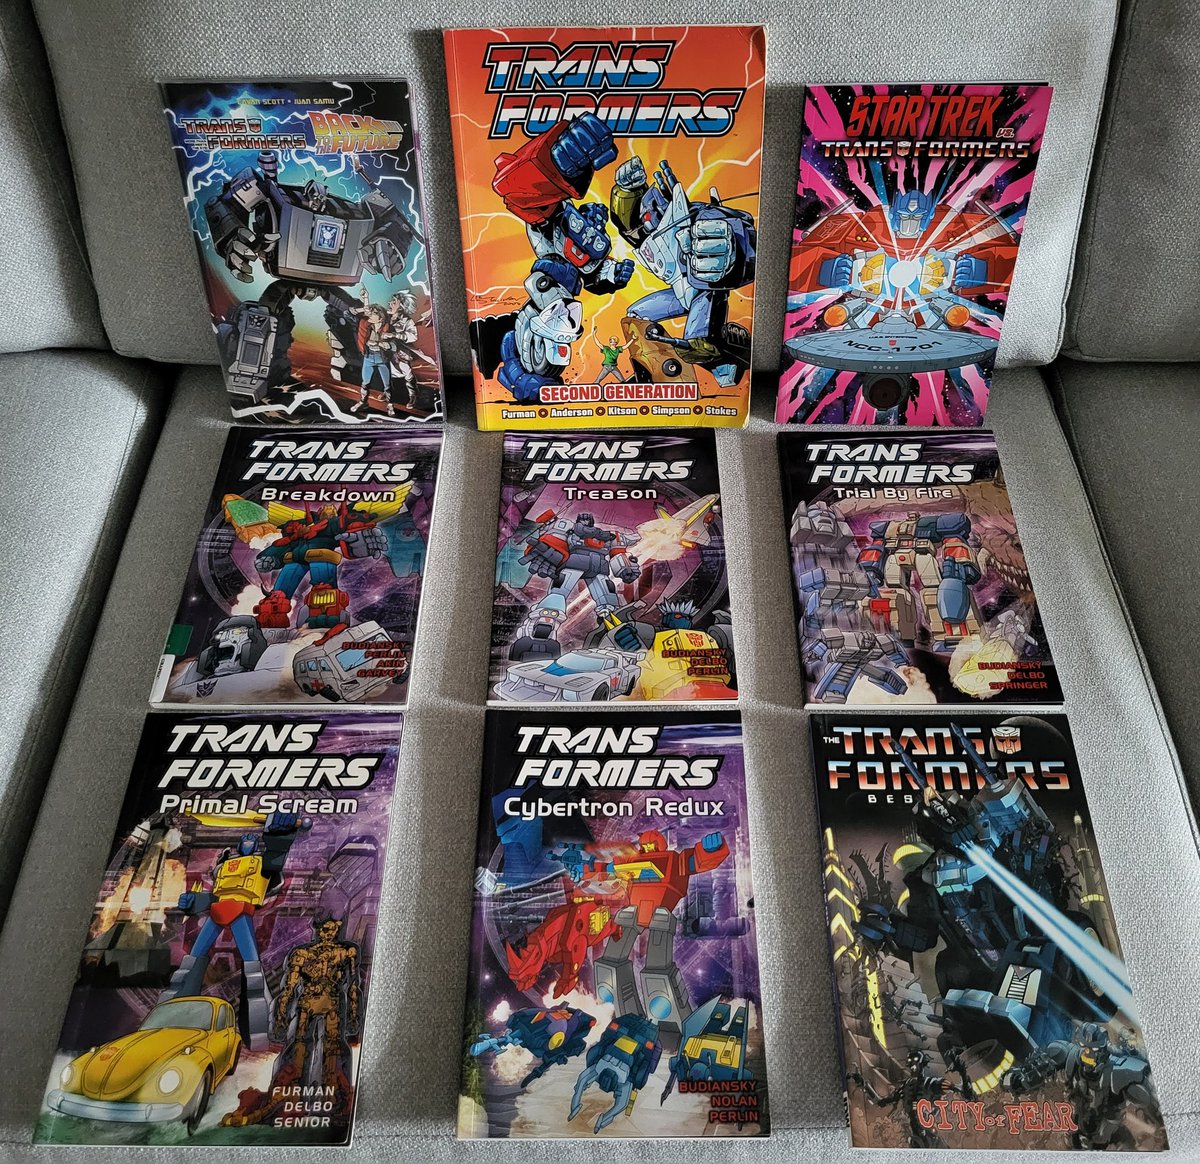 A small part of my #Transformers graphic novel collection. Some truely classic stories contained within these pages 📖

Loved getting the weekly comic delivered to my home and reading it over the weekend while off school 💯

Memories for life...🤖🚚

#MoreThanMeetsTheEye
#RollOut